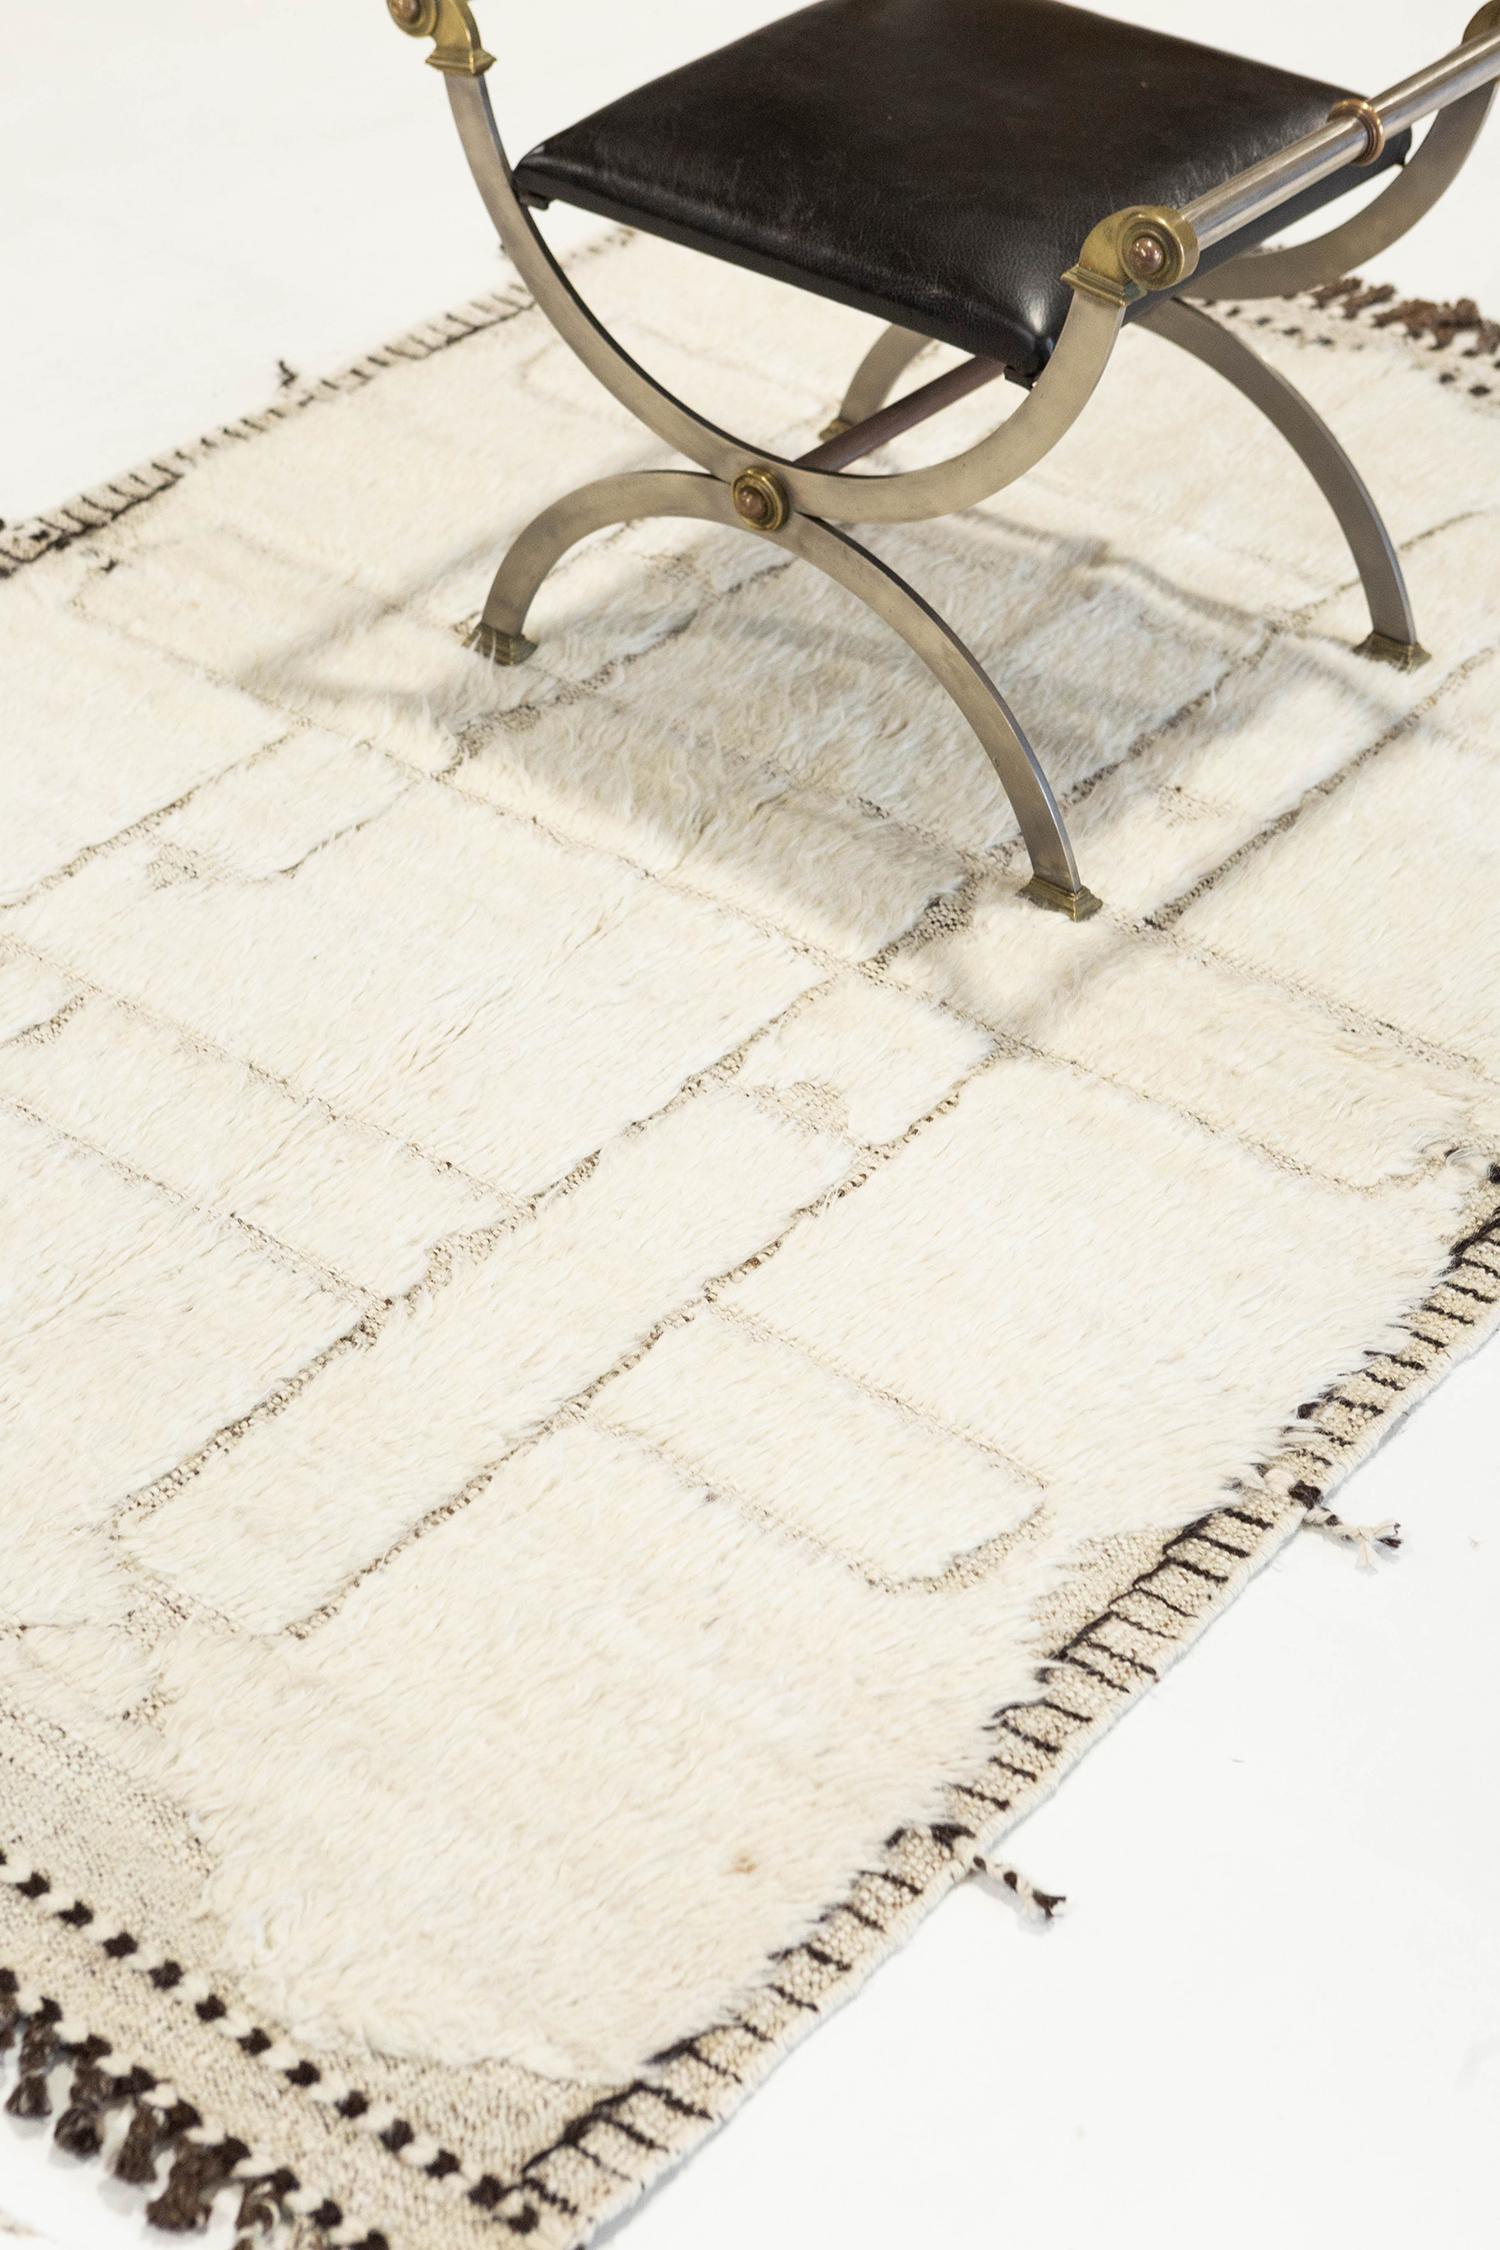 'Essaouina' is a beautifully textured rug with embossed designs inspired from the Atlas Mountains of Morocco. Natural colored motifs surrounded by ivory shag and tasseled borders make for a great contemporary interpretation for the modern design